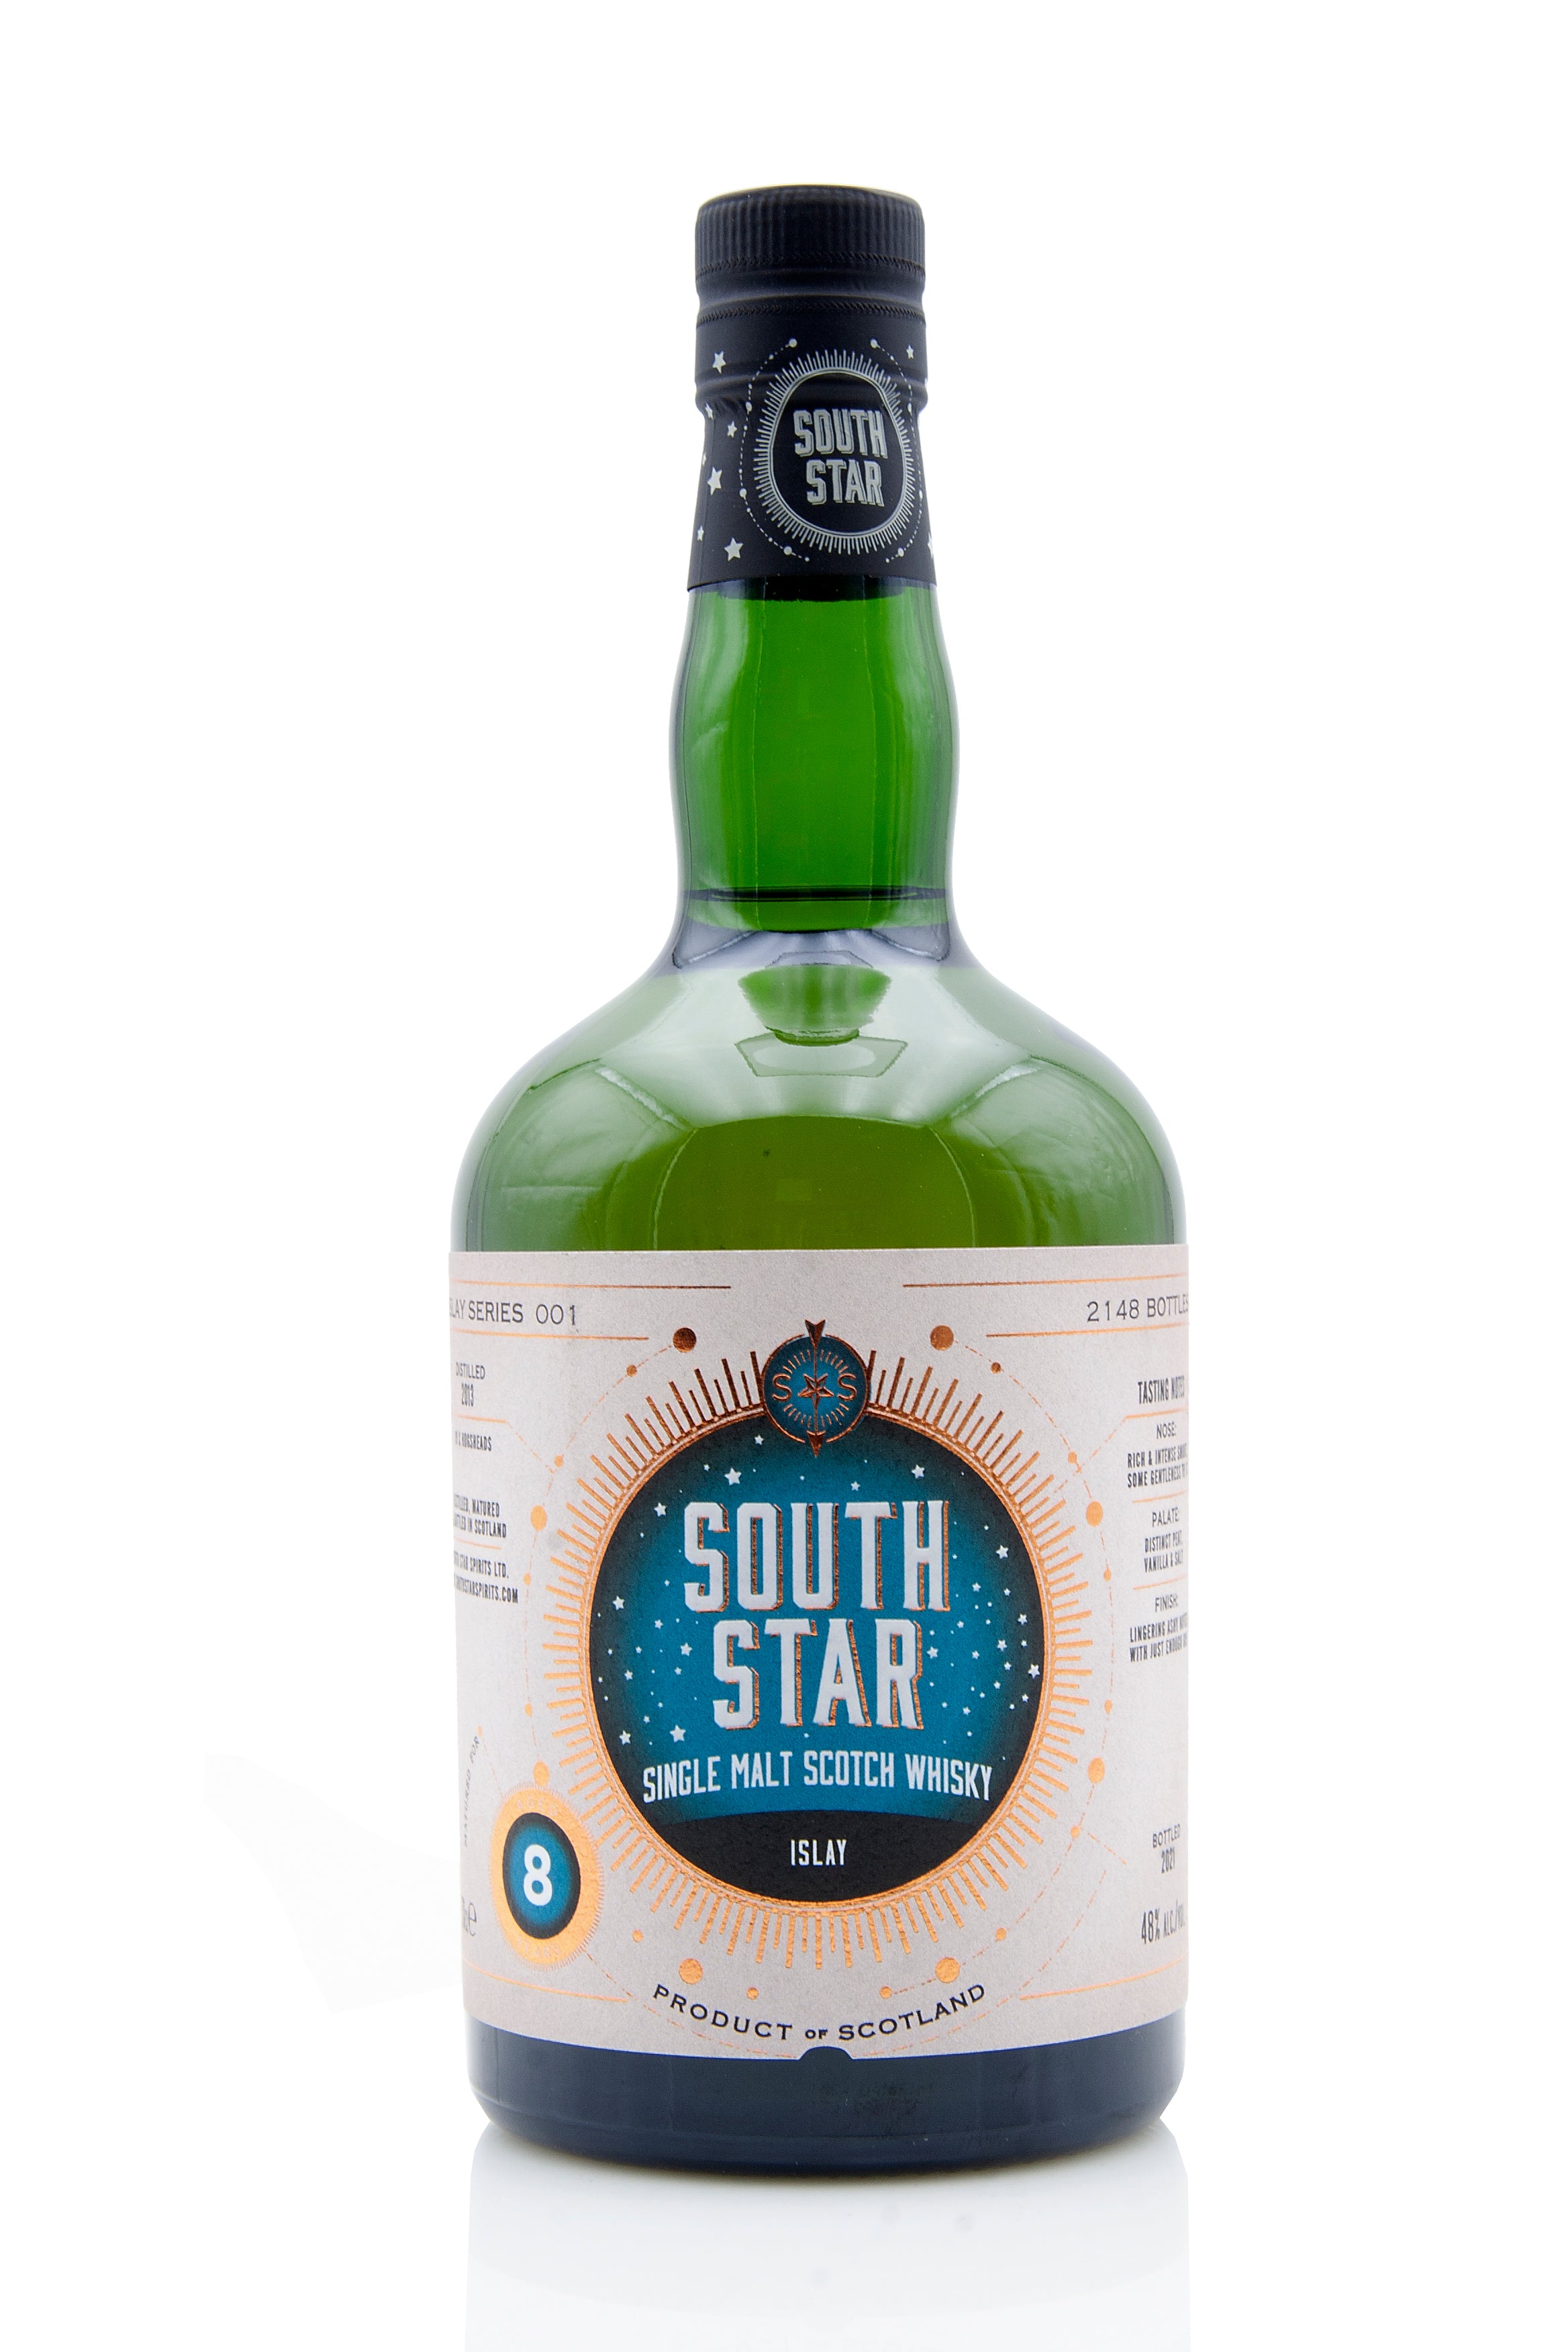 South Star Islay 8 Year Old - 2013 Vintage | Abbey Whisky Online